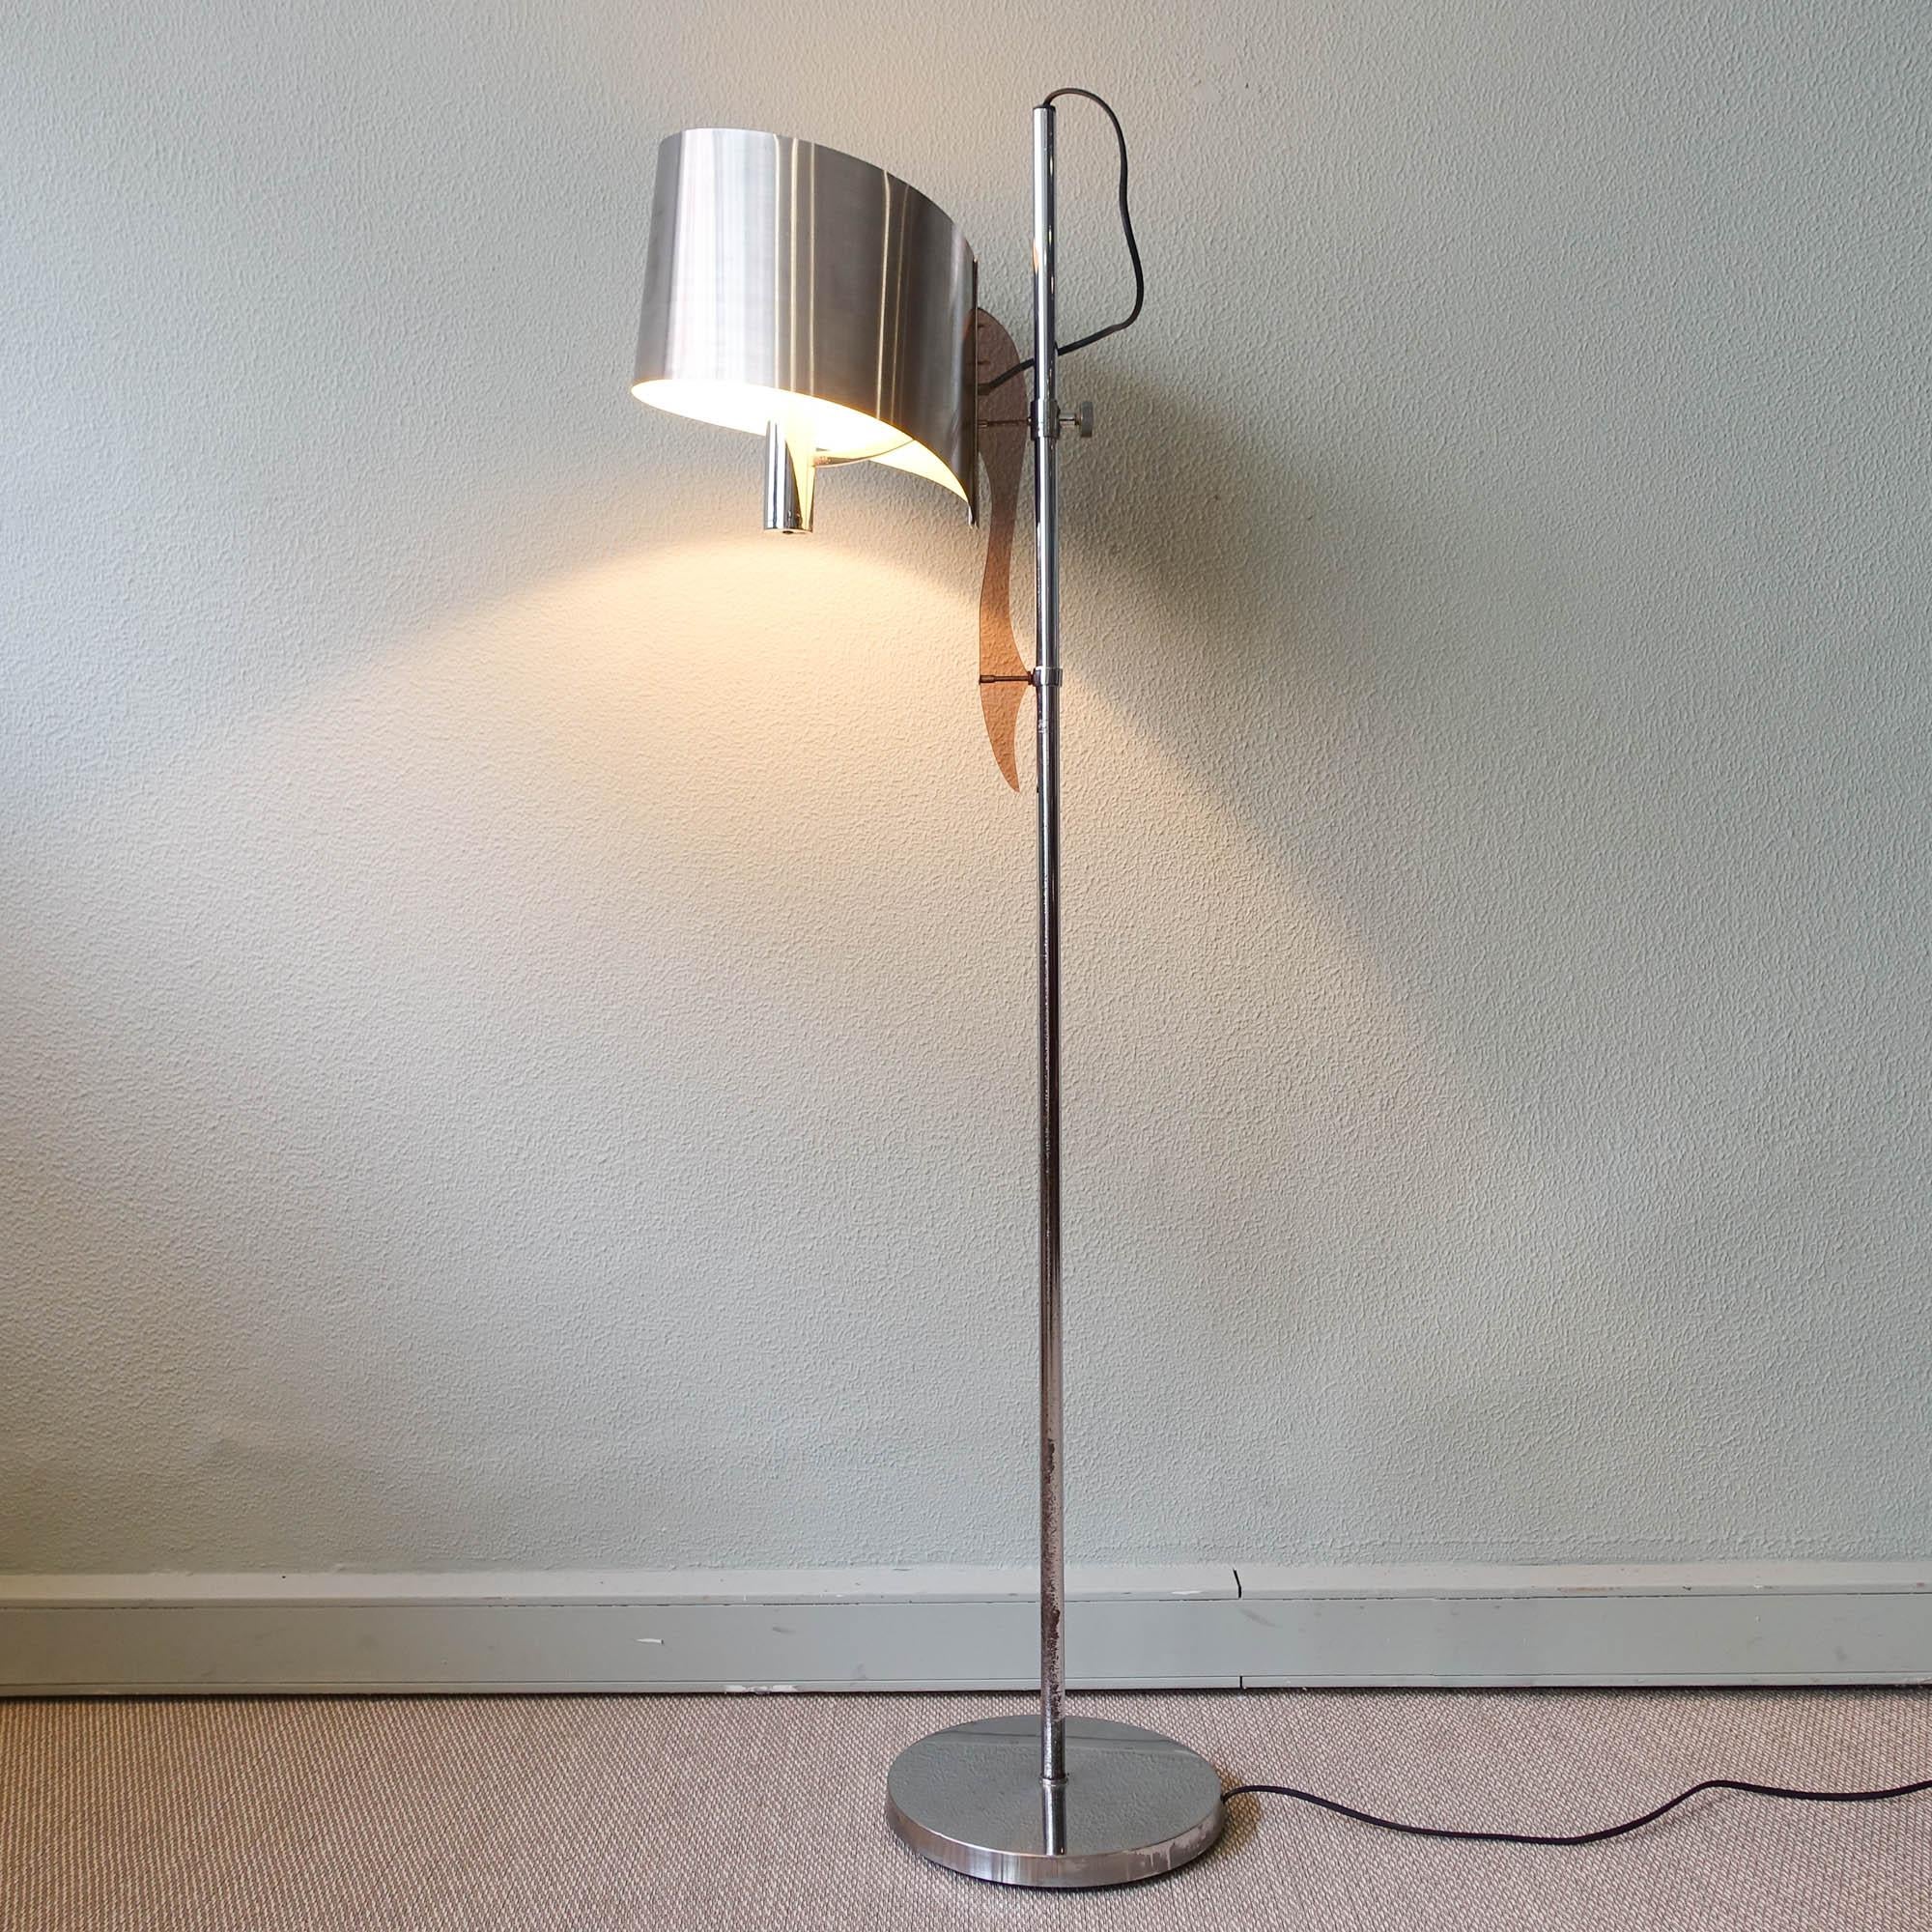 This floor lamp, model 'Ruban' (ribbon), was designed by Jacques Charles around 1965. Just like many other Charles designs from that period it’s shade is made out of folded metal, which gives the lamp a sculptural appearance. The ribbon shaped shade